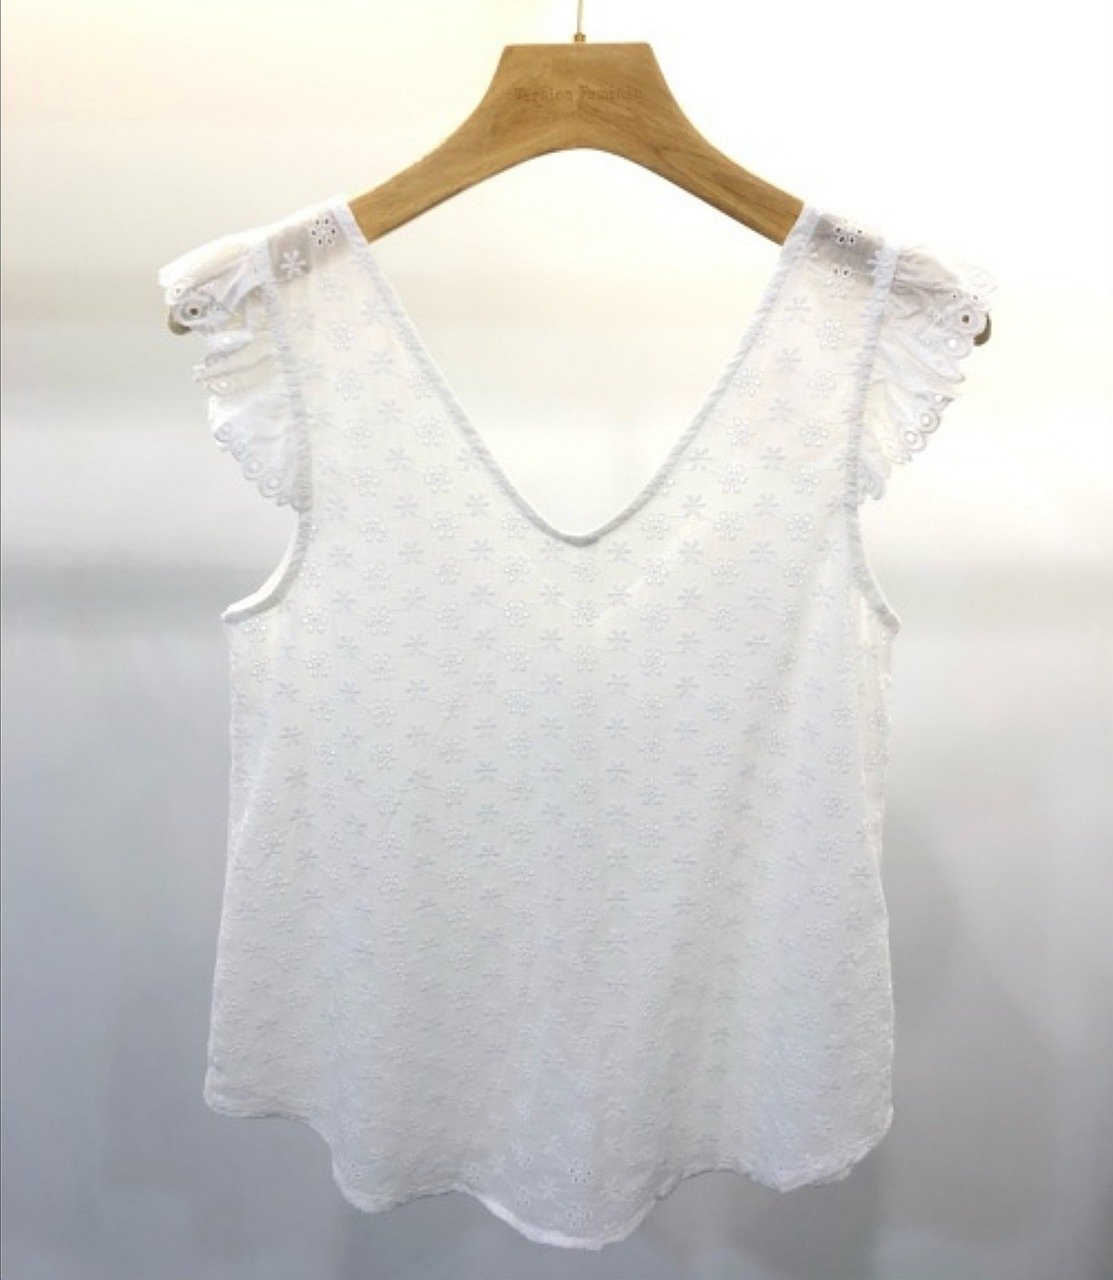 Top broderie blanc